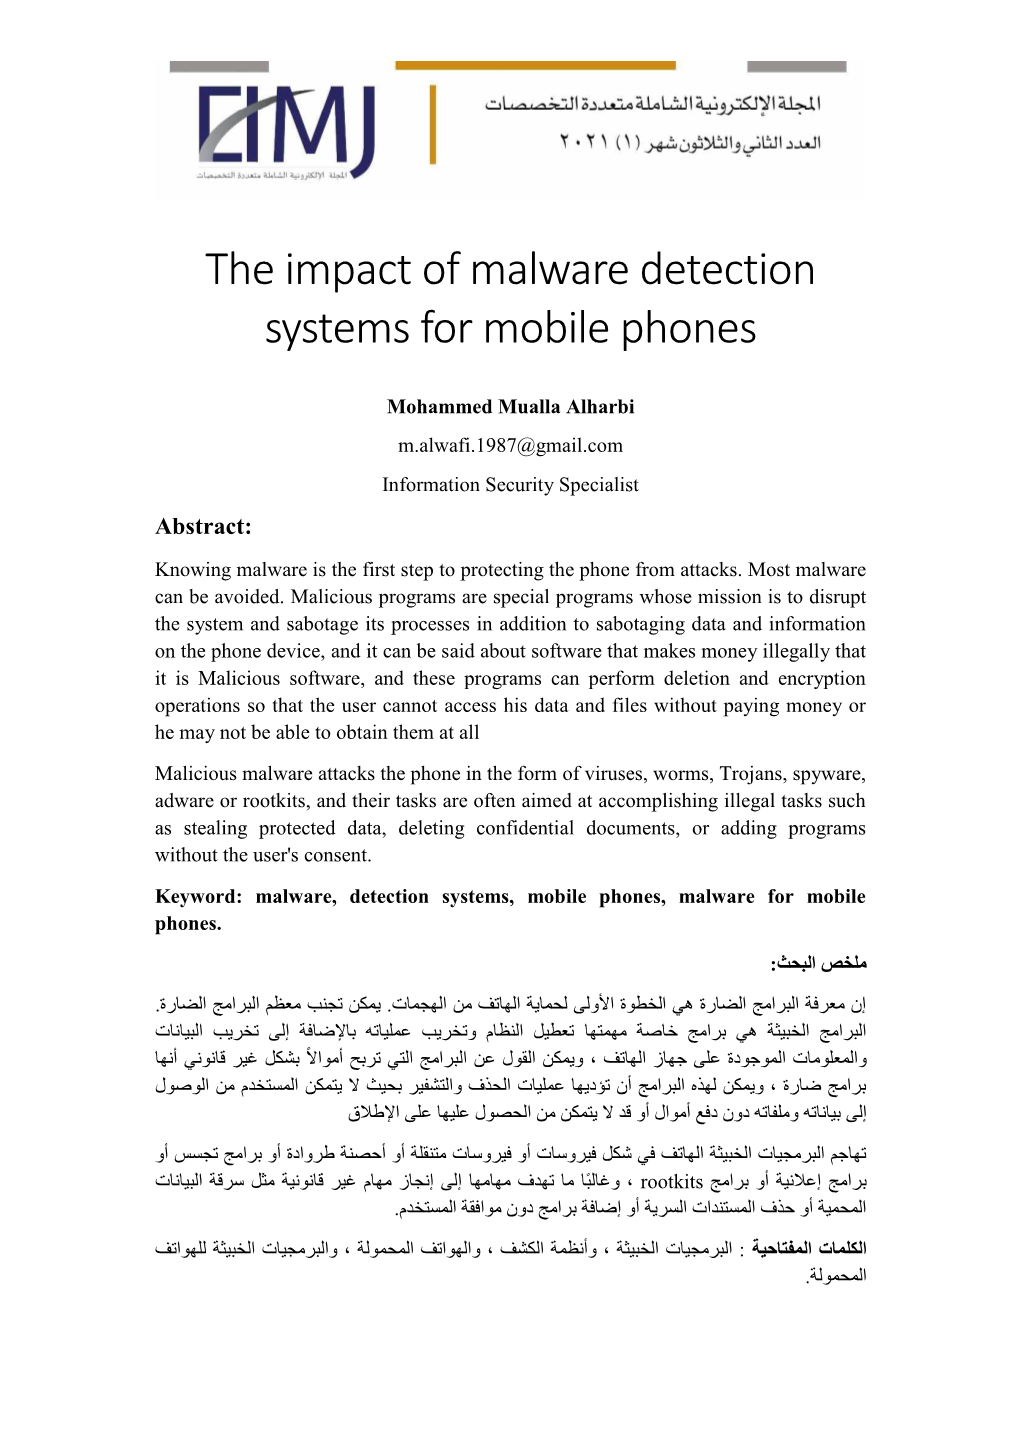 The Impact of Malware Detection Systems for Mobile Phones